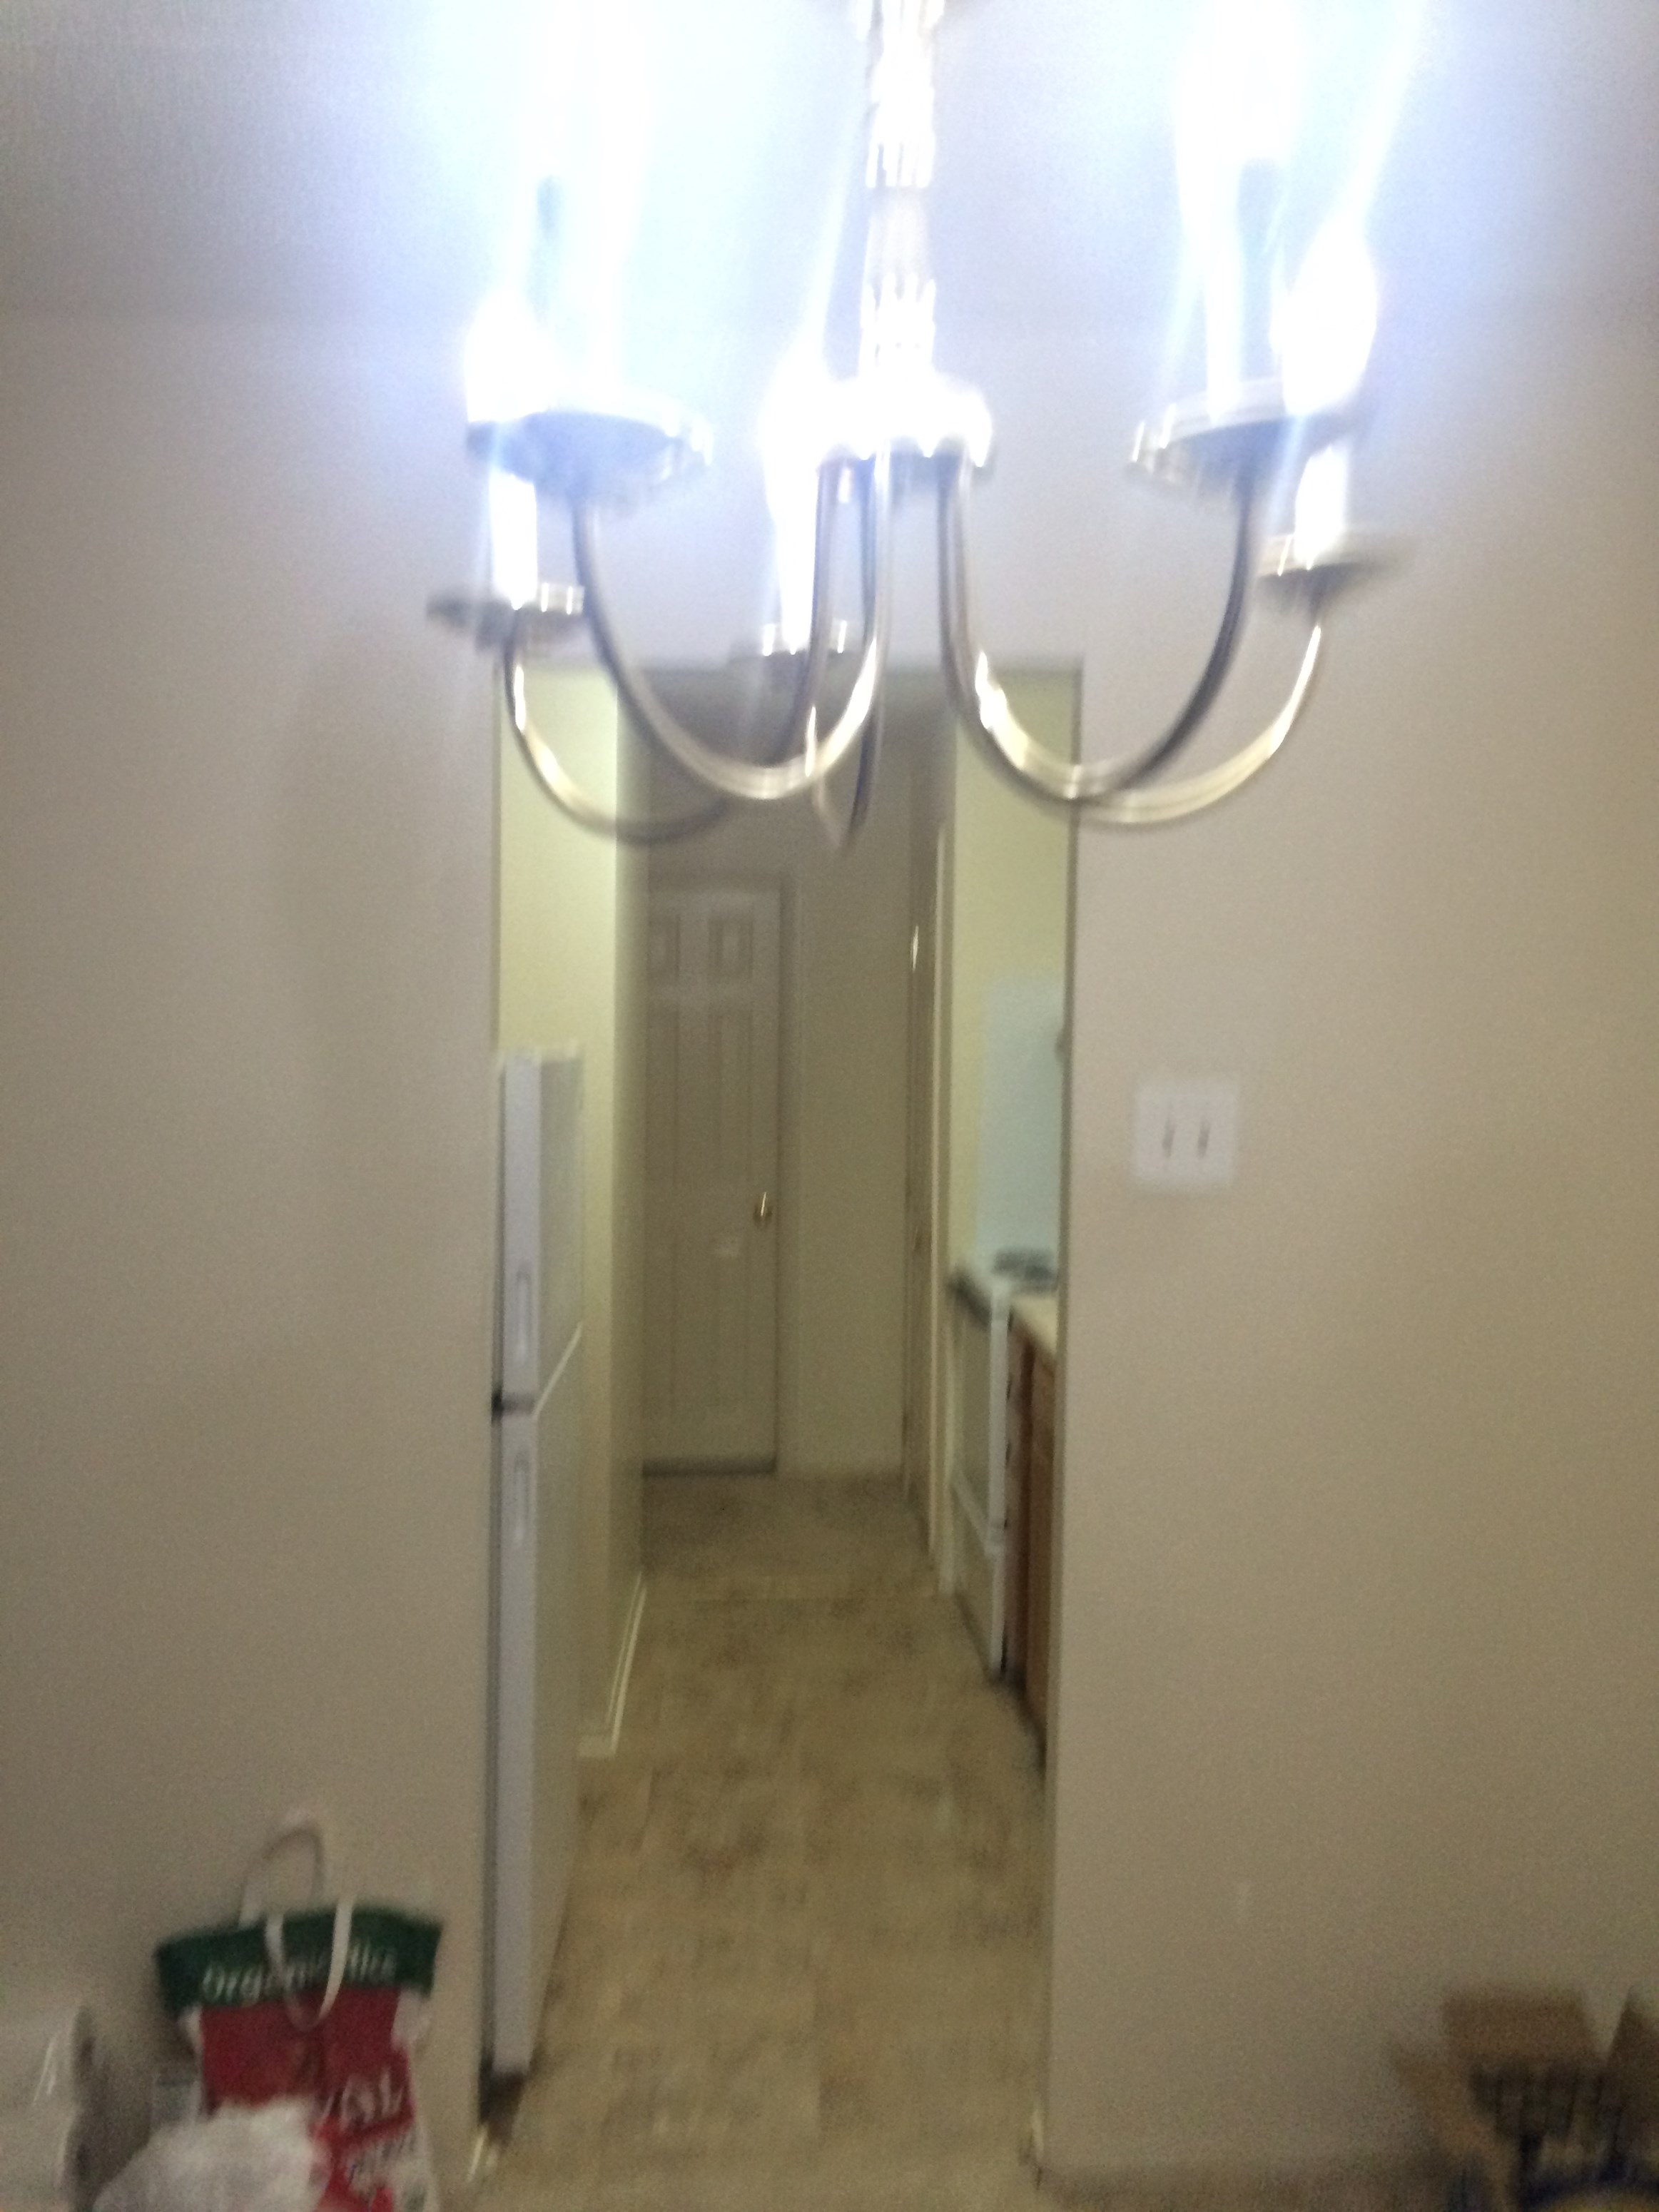 BEDROOM Apt For Rent - Sharing With Two Others. in West Chester PA ...